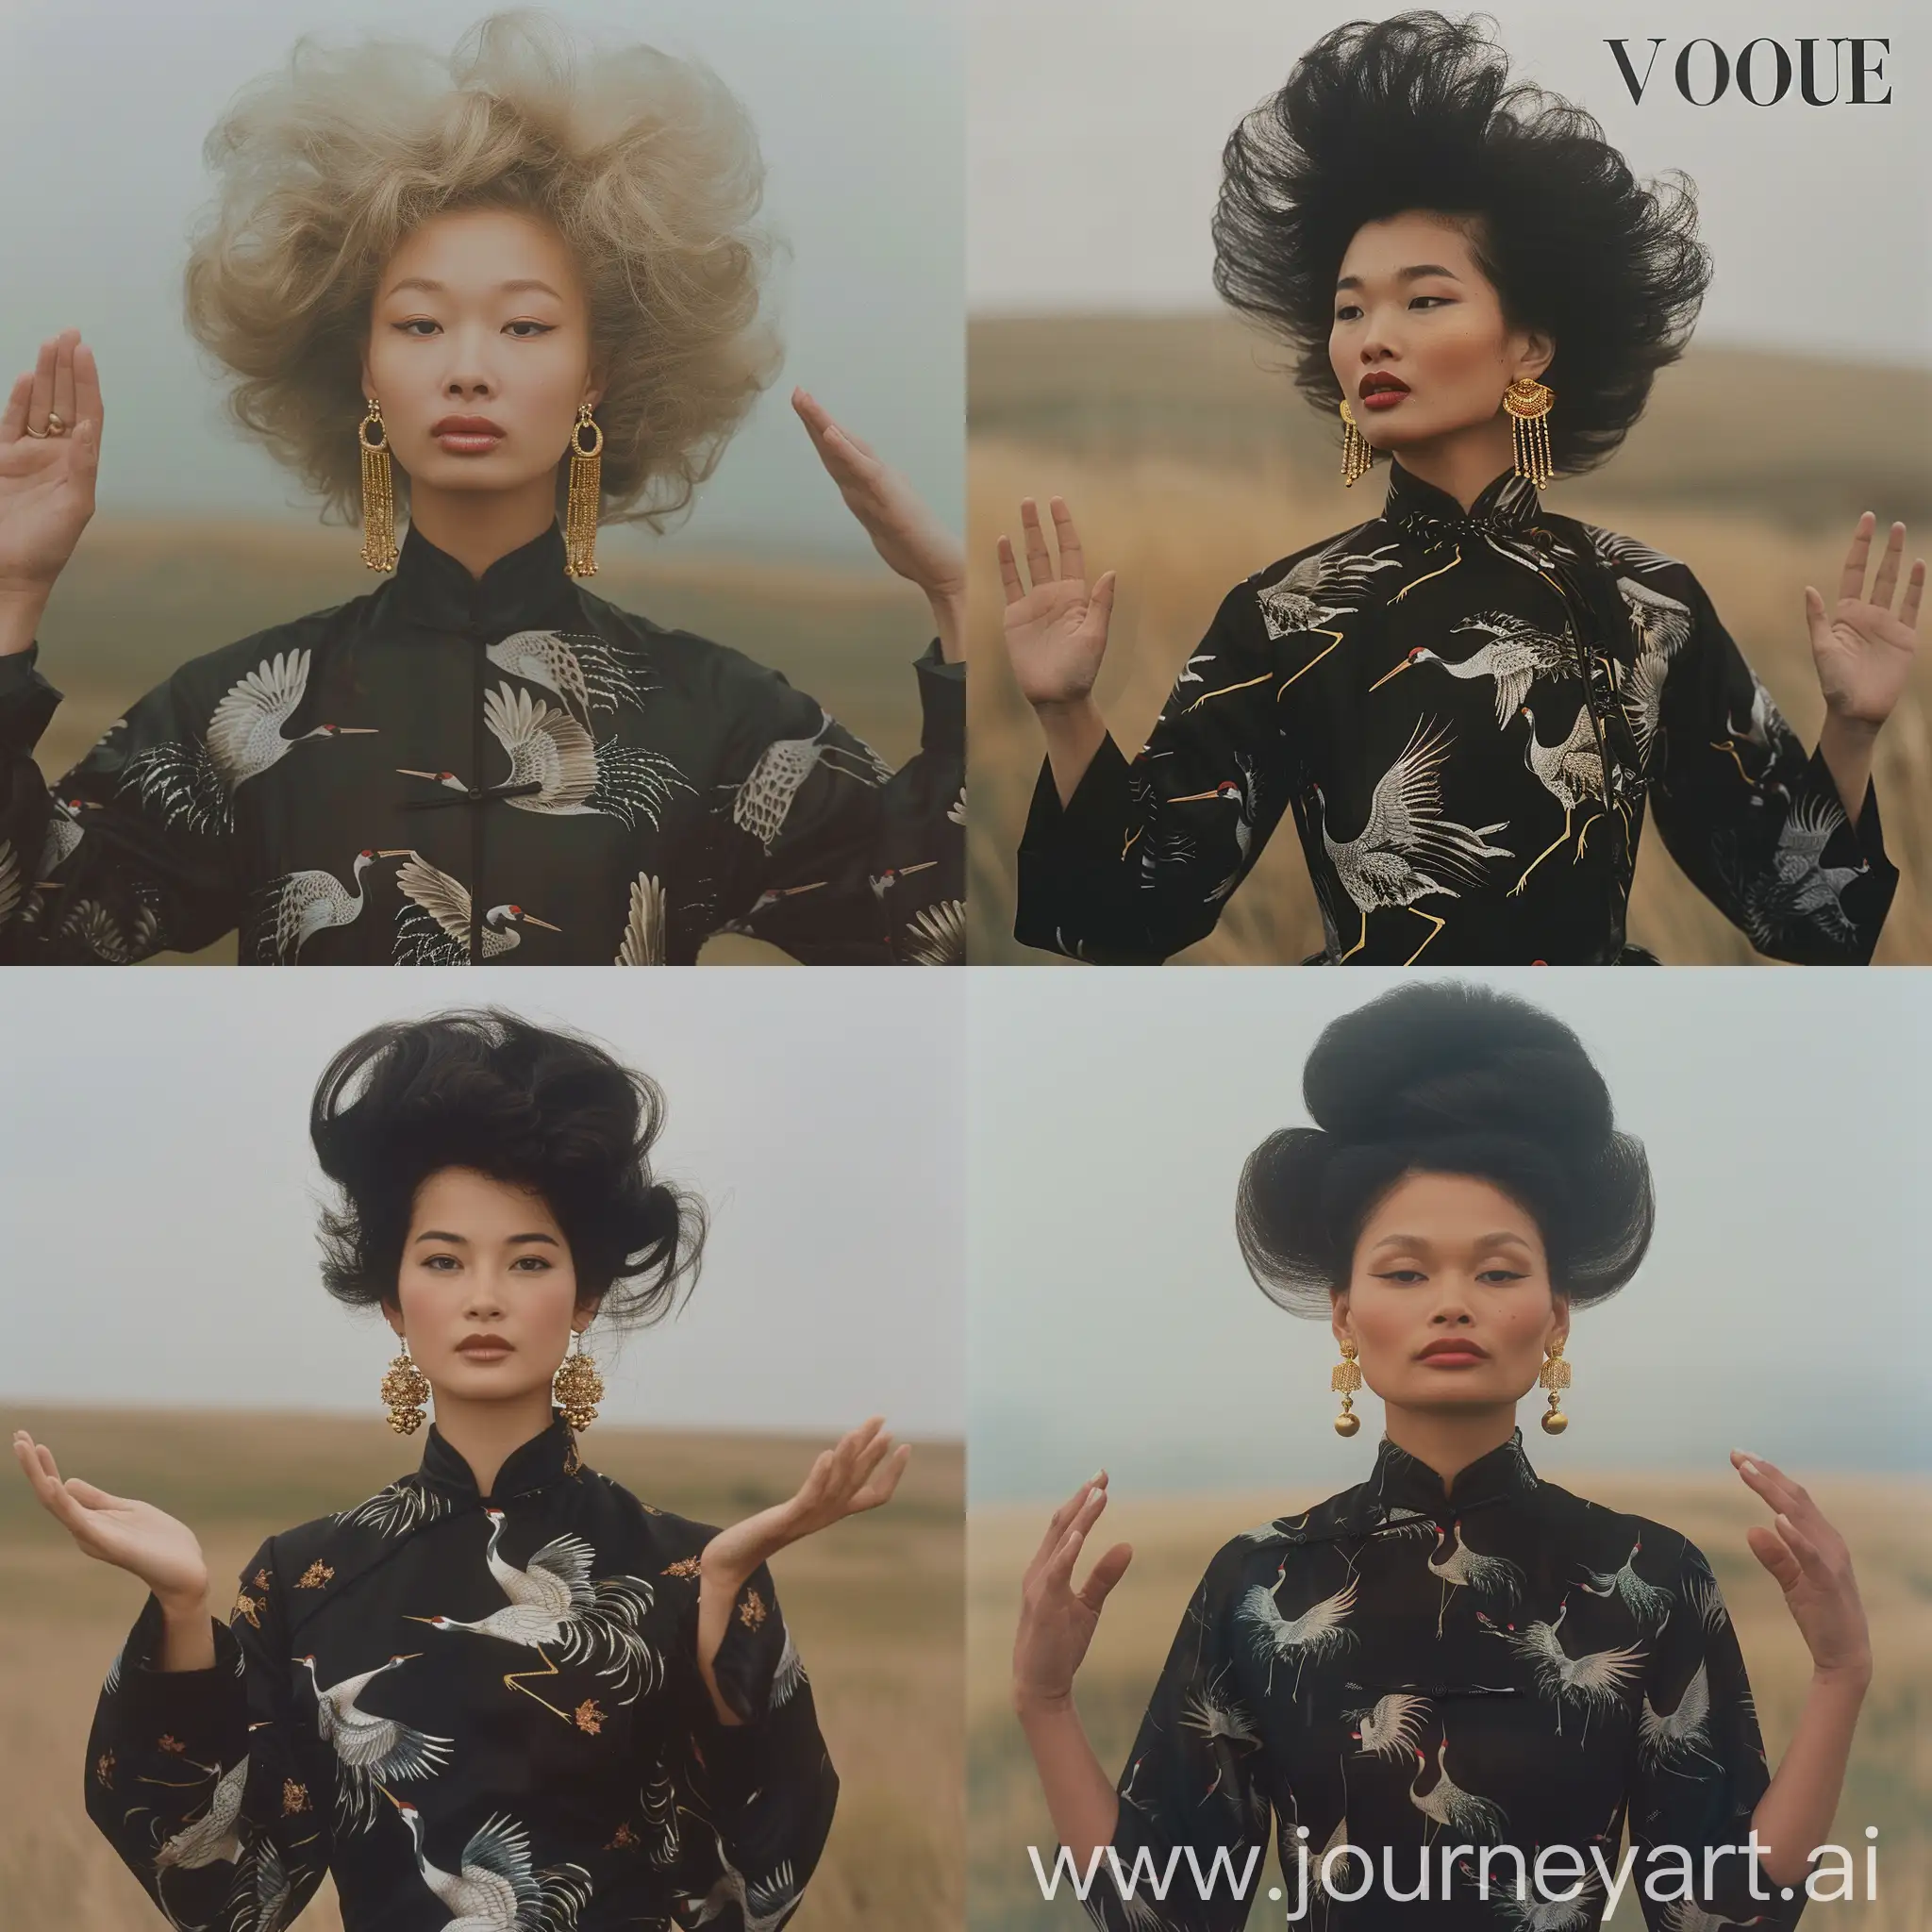 Elegant-Woman-in-Classic-Chinese-Dress-Amidst-Misty-Steppe-Vogue-1990-Cover-Art